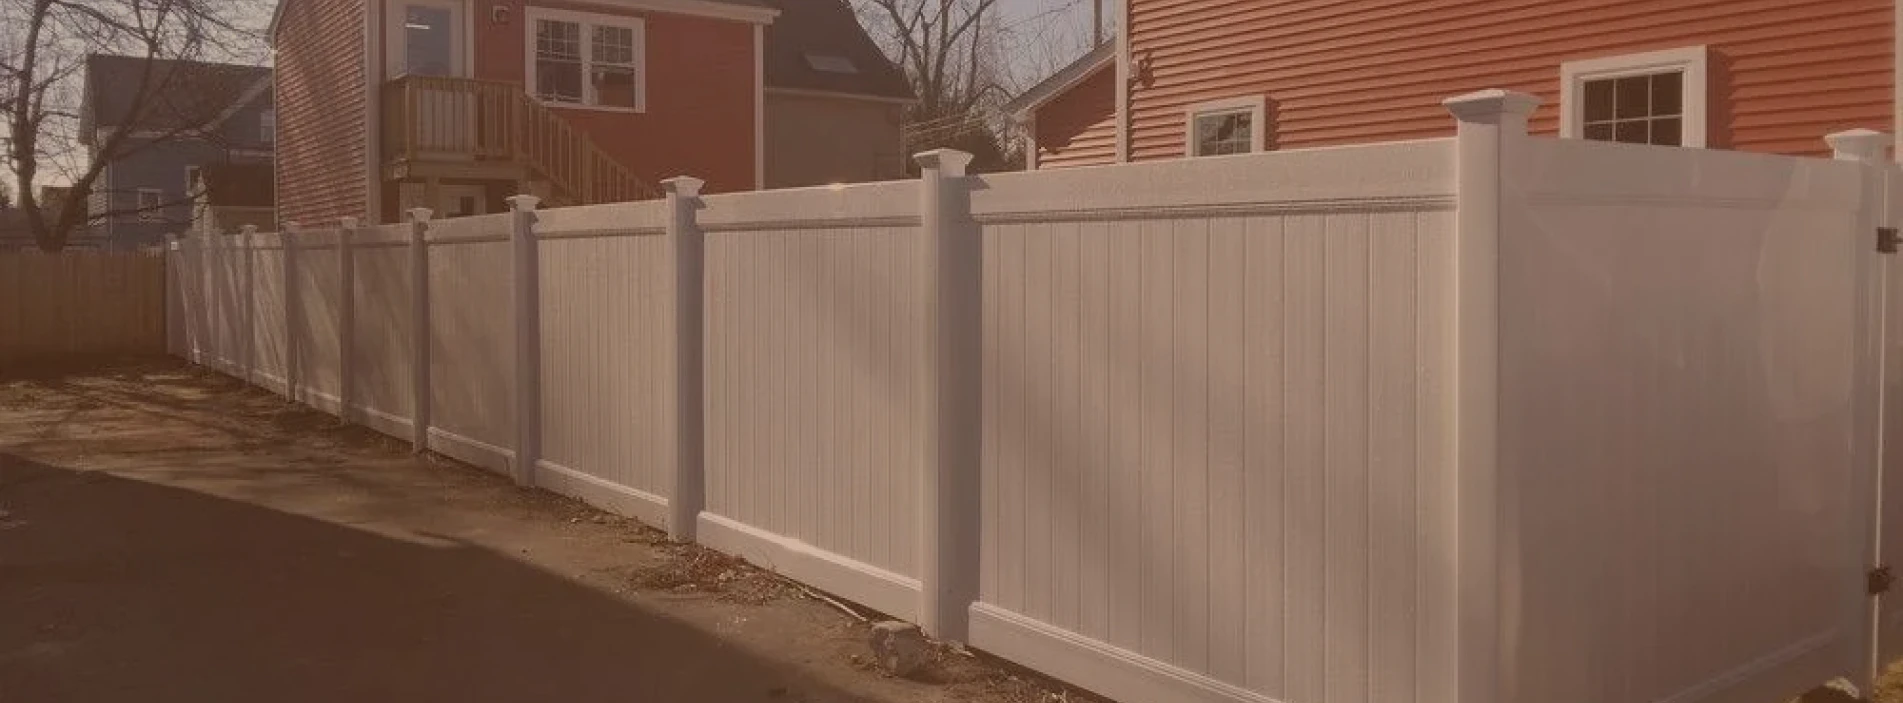 wooden fence on residential house